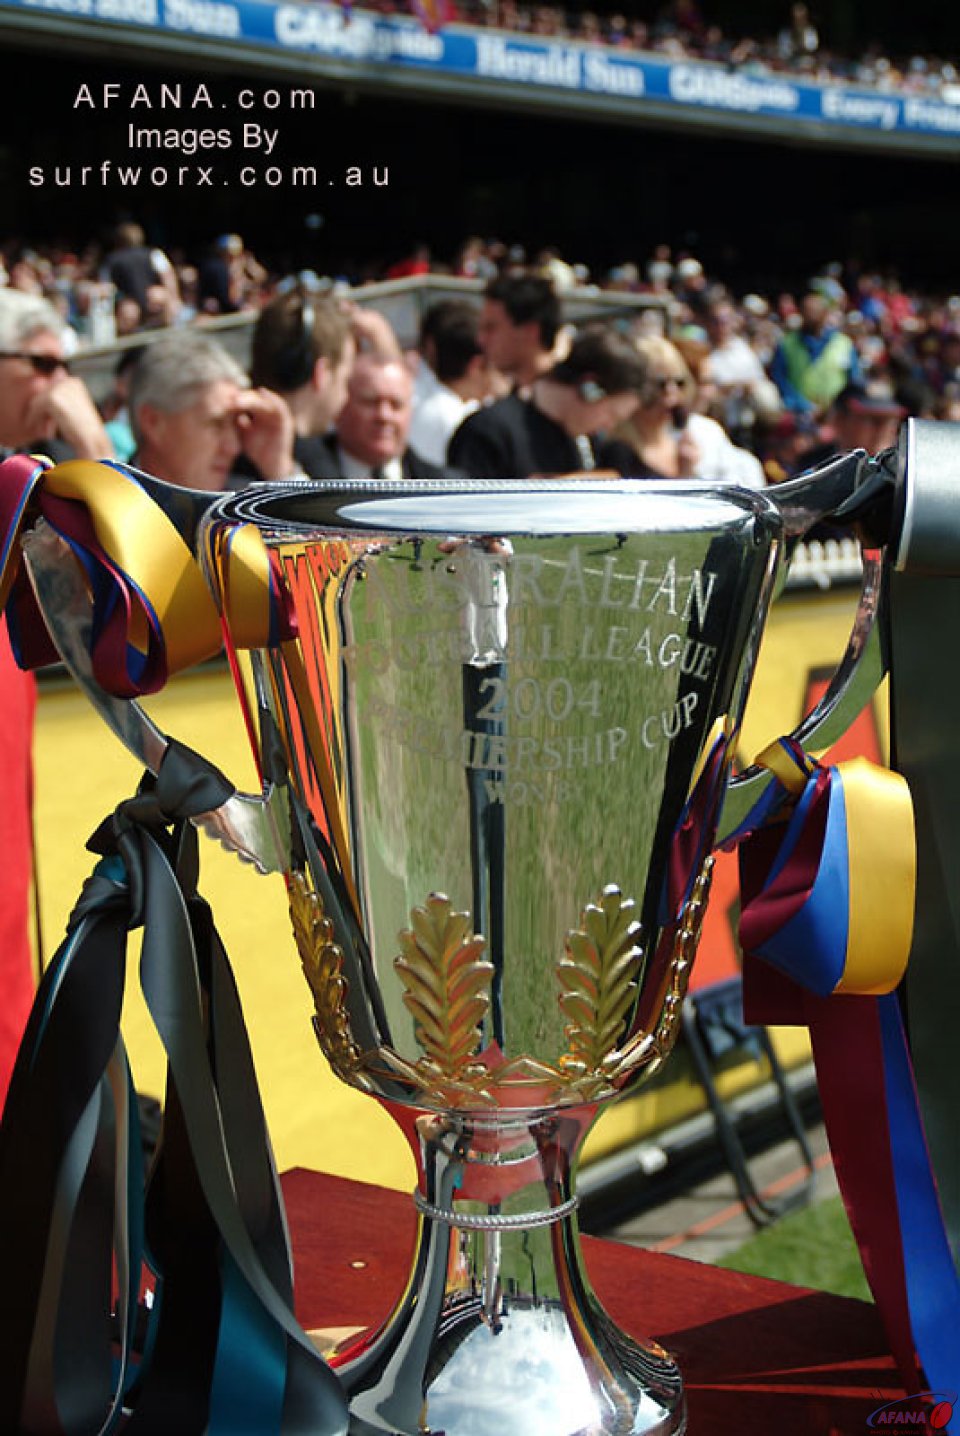 The AFL Premiership Cup on display before the match.